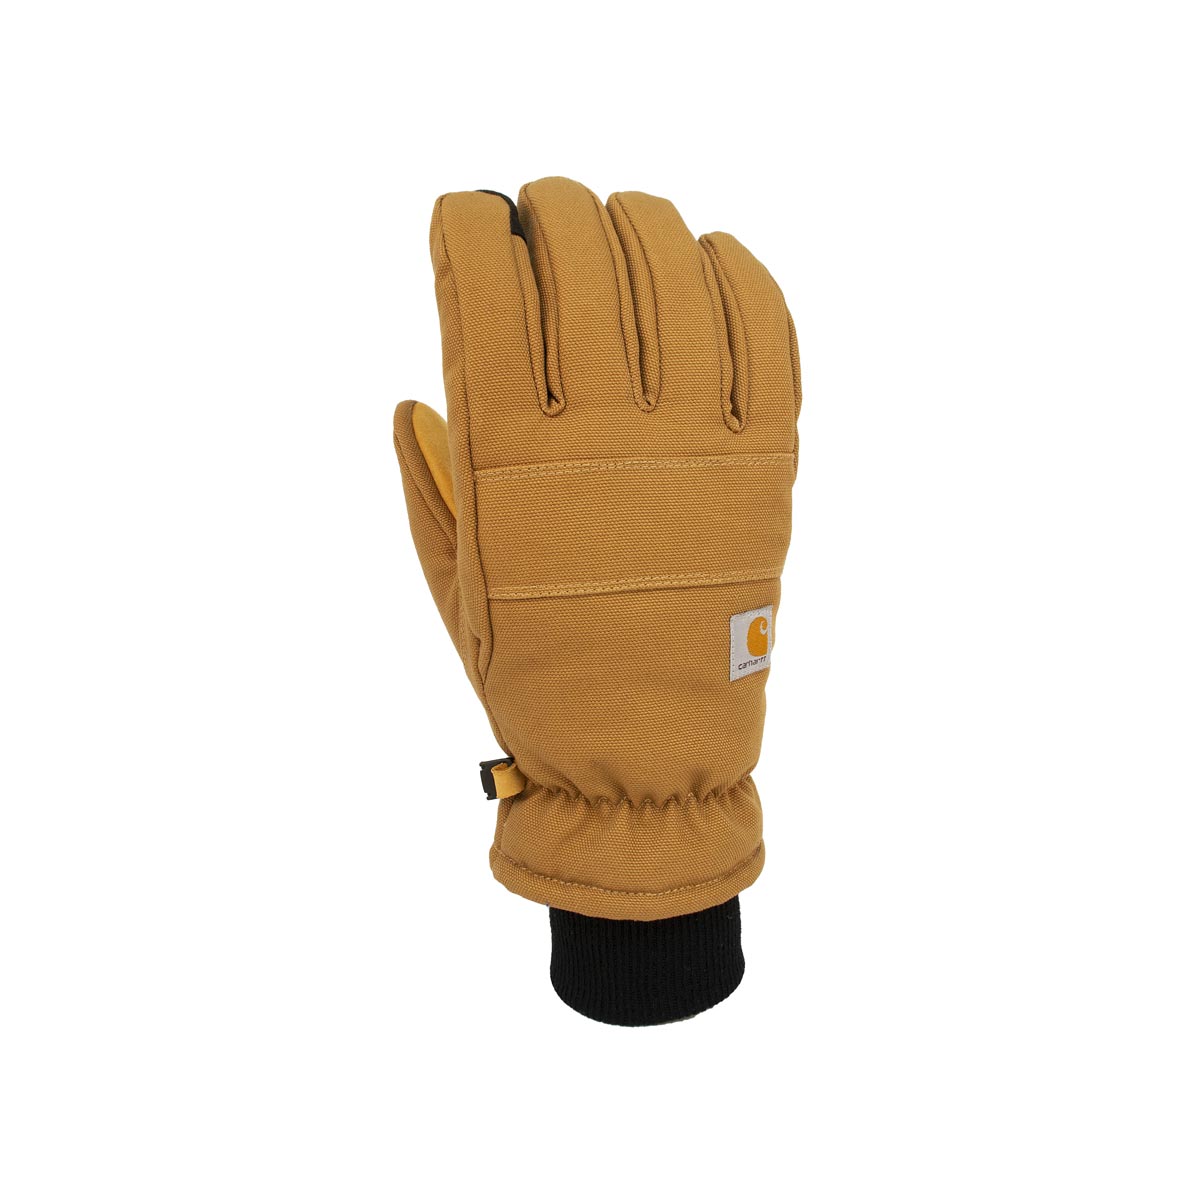 Carhartt Women's Insulated Duck/Synthetic Leather Knit Cuff Glove